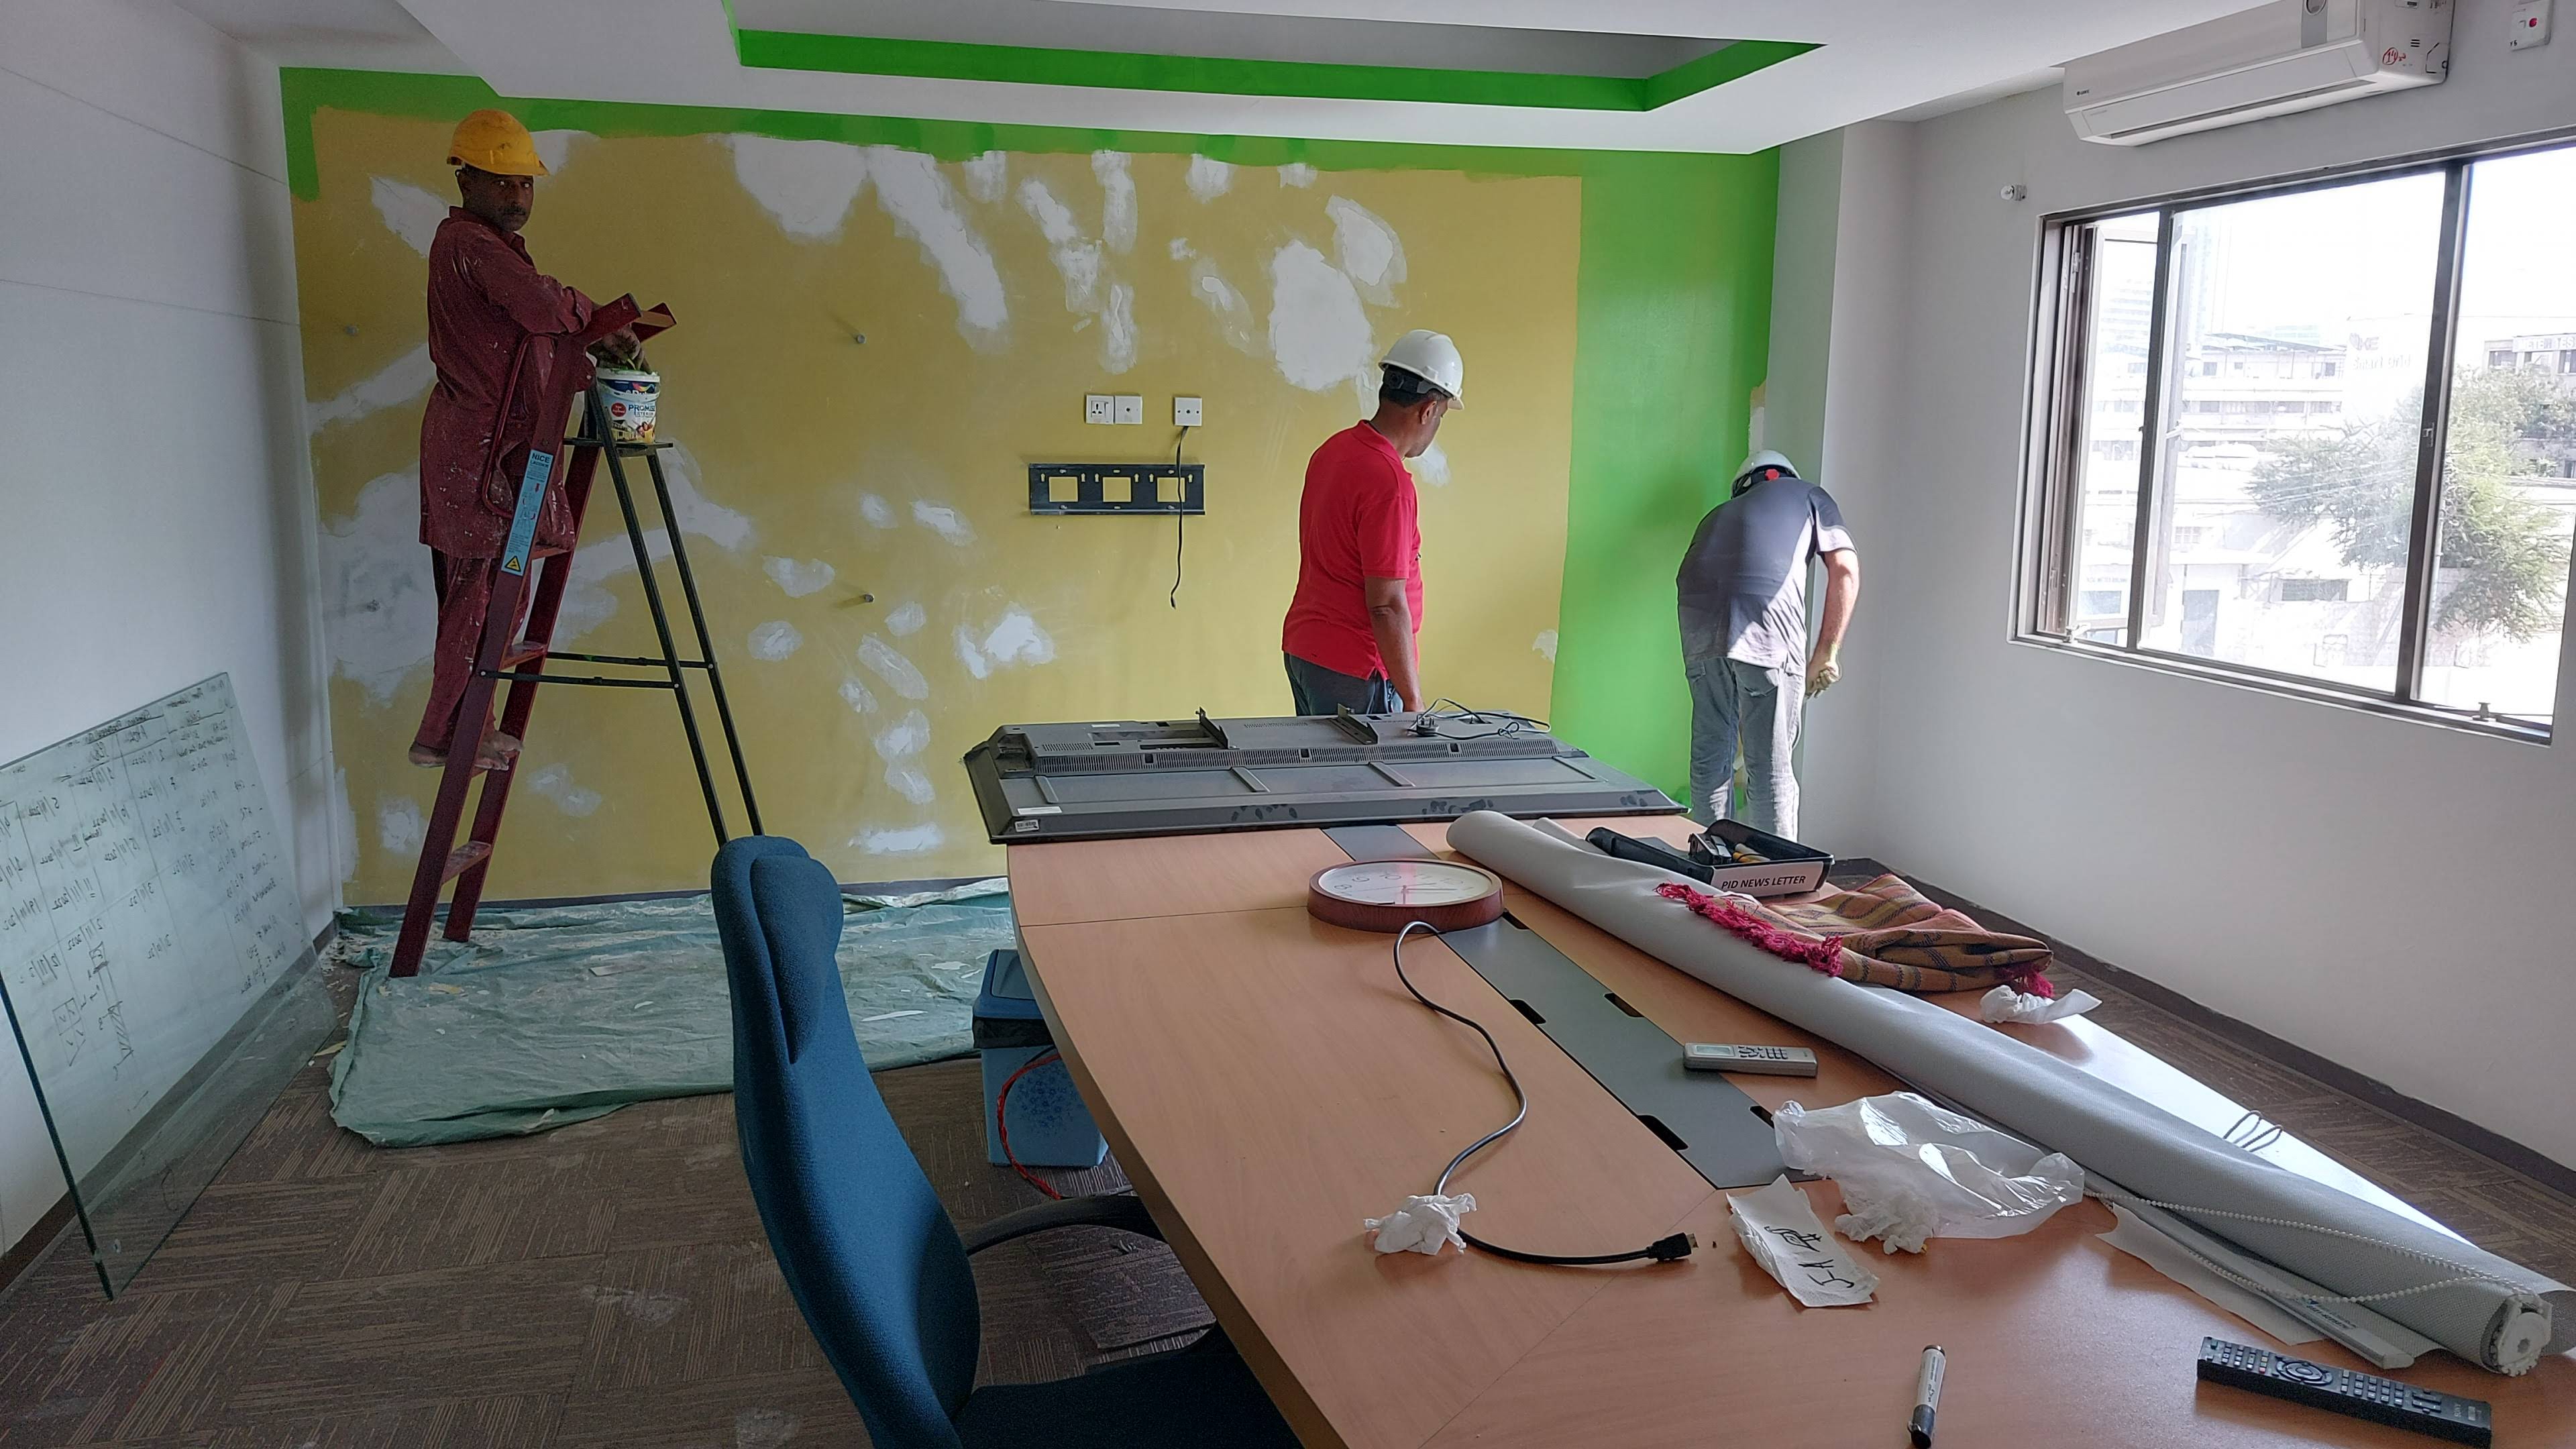 An office meeting room is being renovated by Hudson Engineering Team.